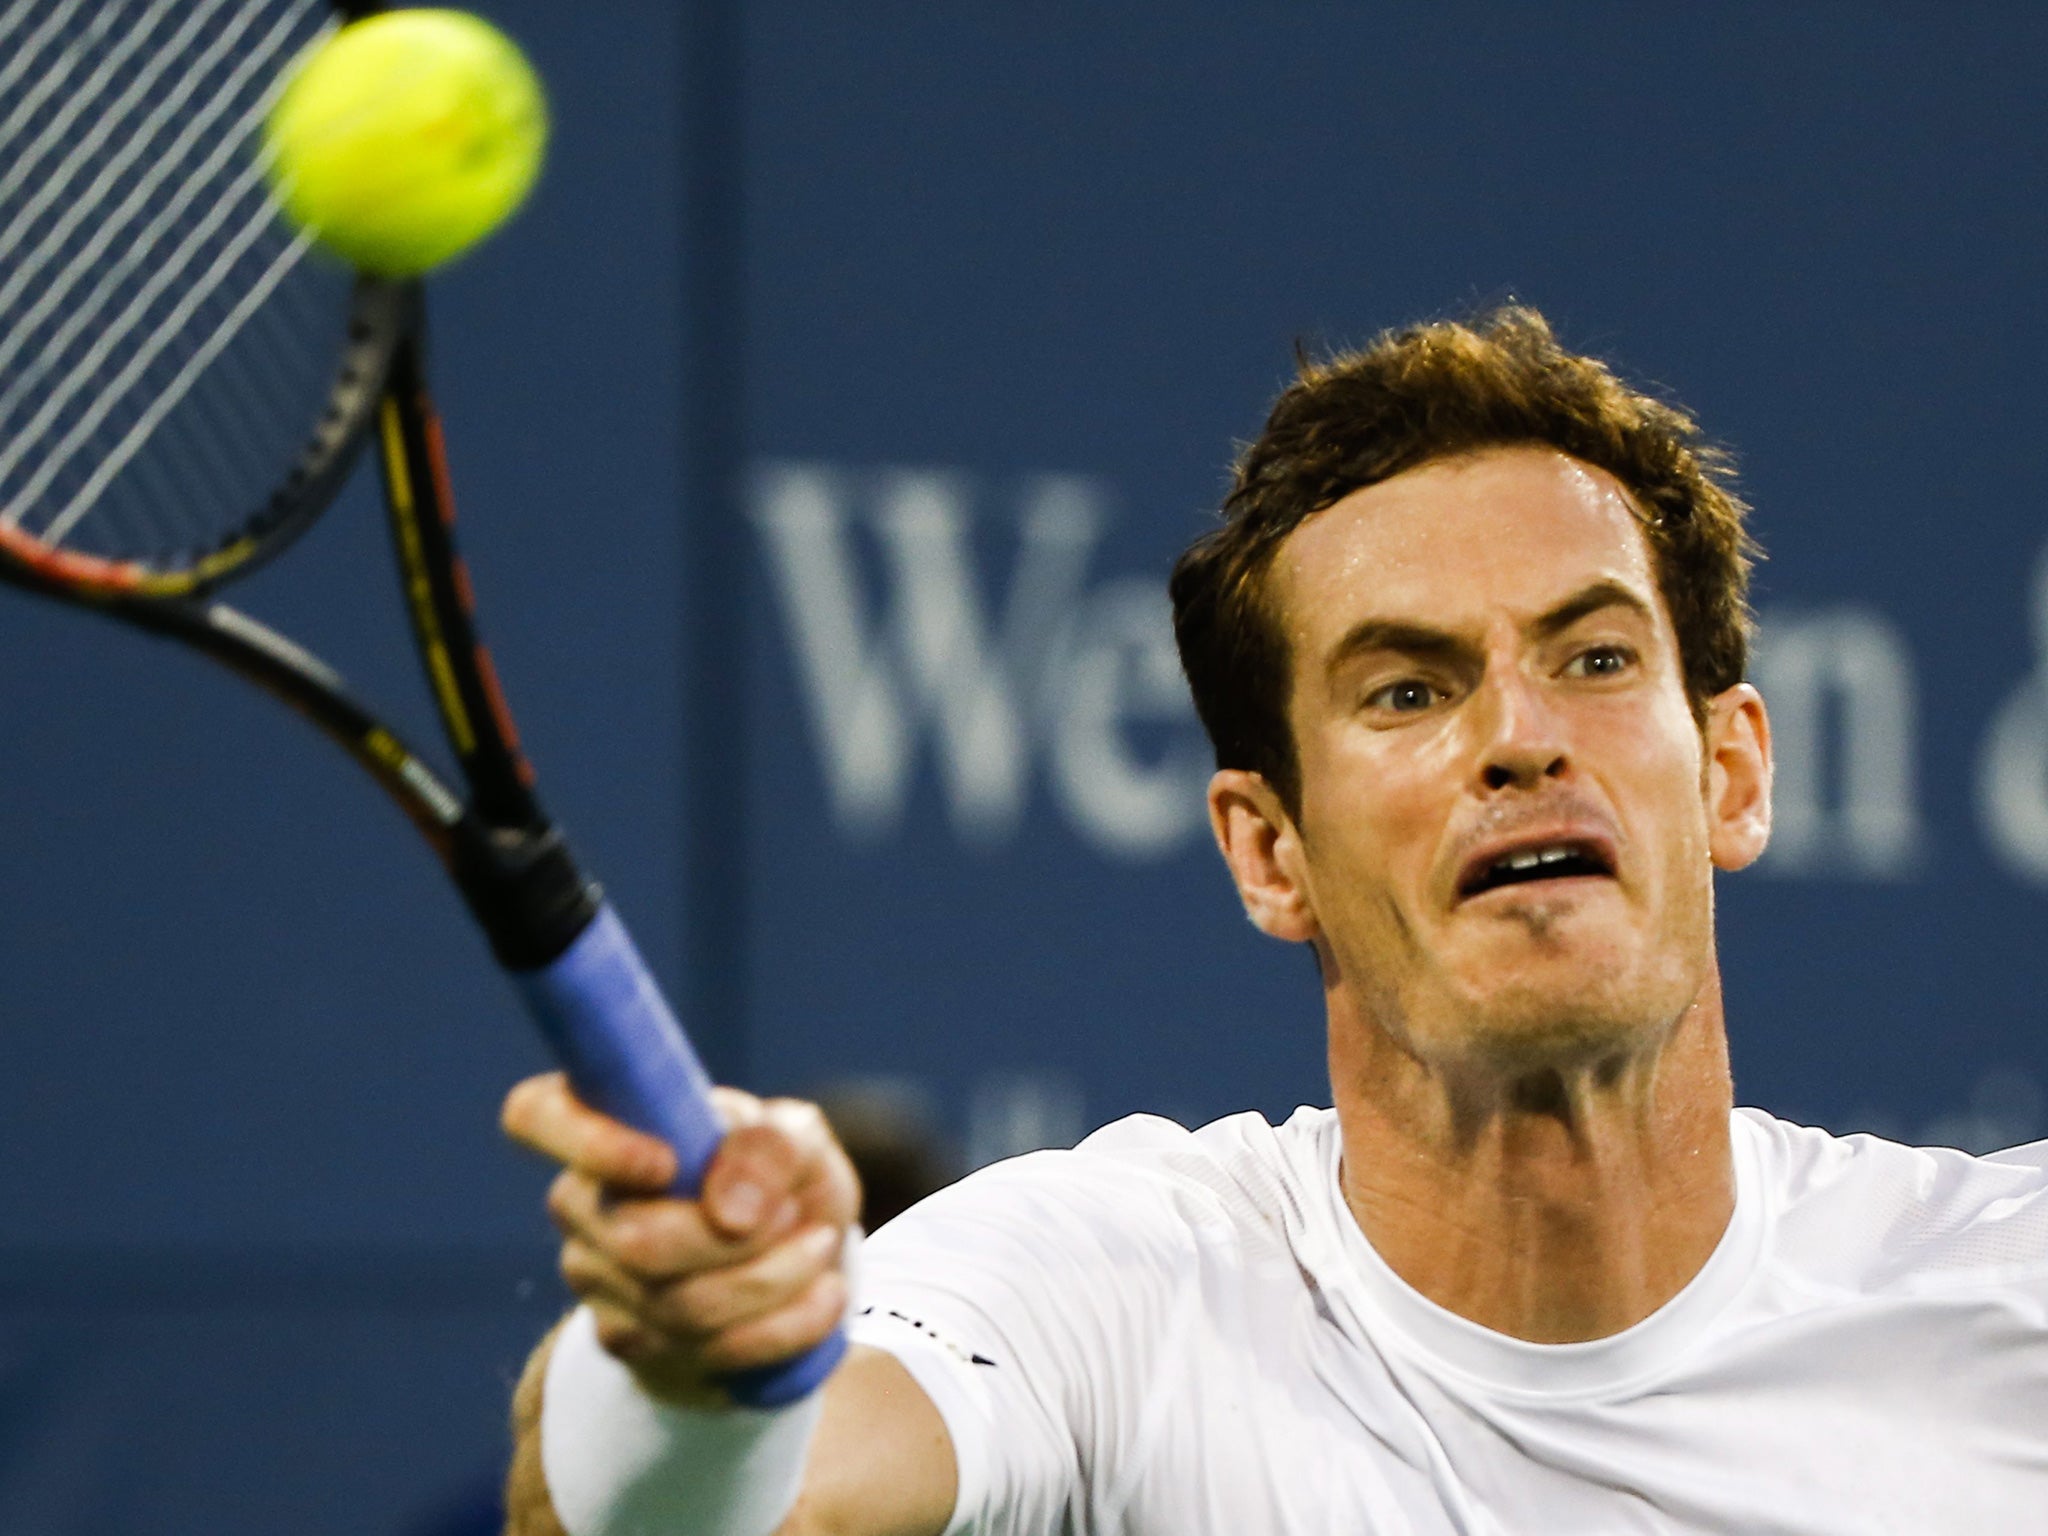 Andy Murray beat Nick Kyrgios in straight sets at both Australian and French Opens earlier this year